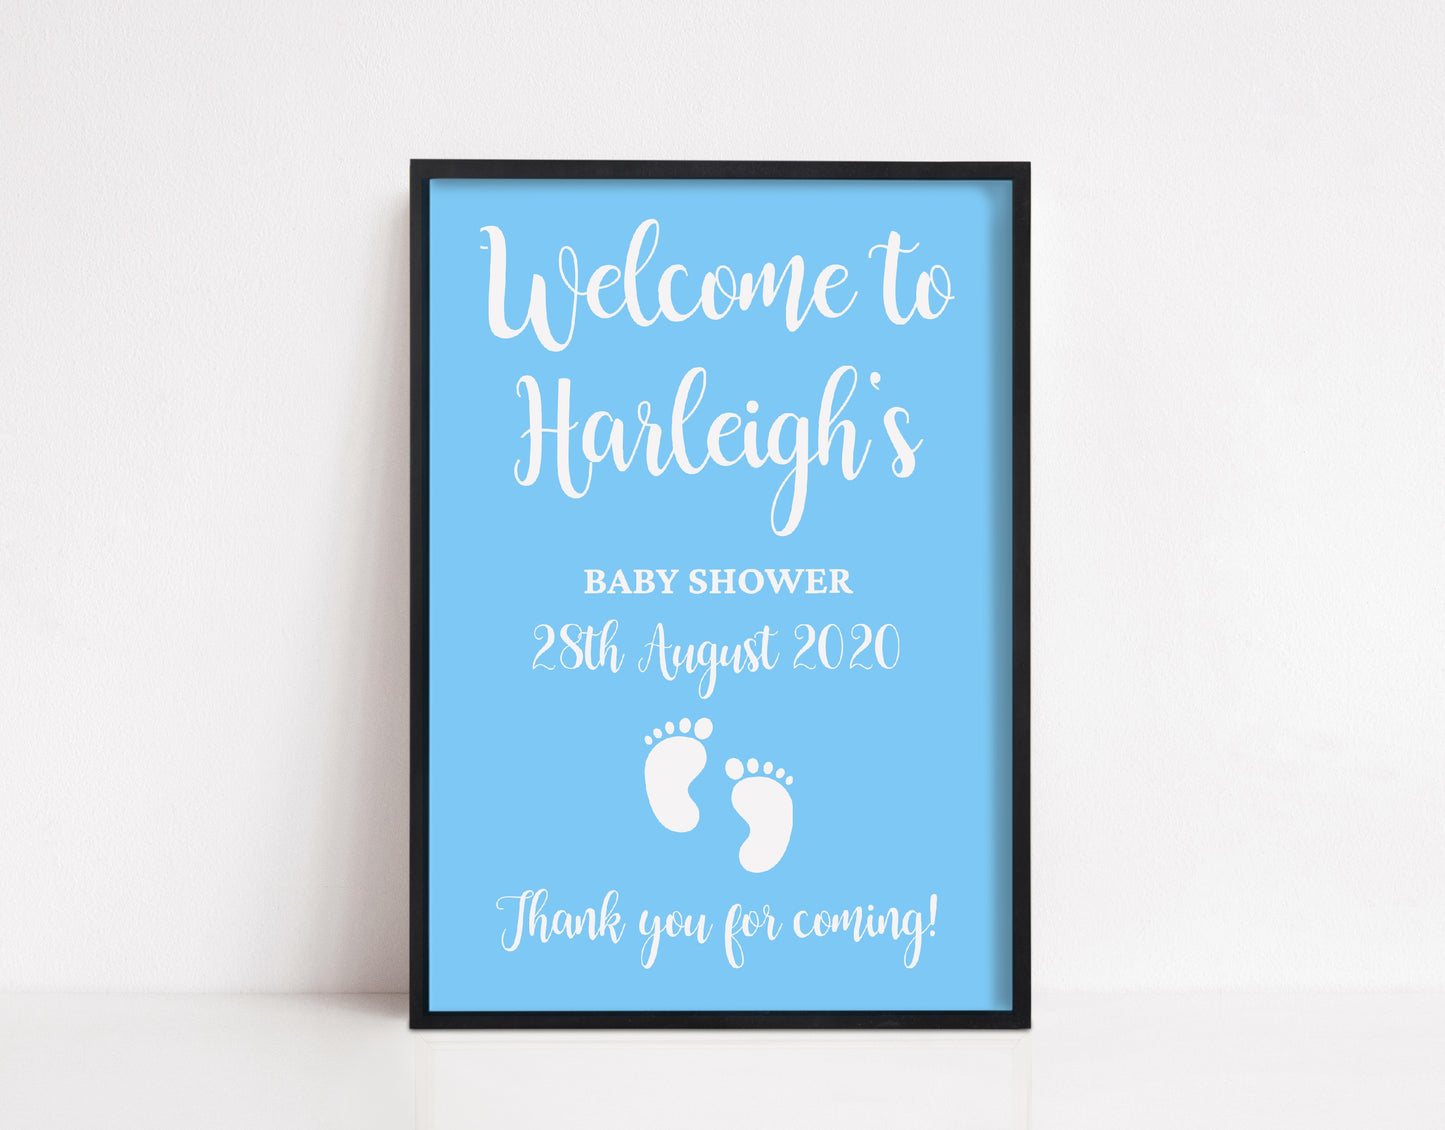 Baby Shower Print | Baby Shower Welcome Print | Baby Shower Décor | Baby Shower